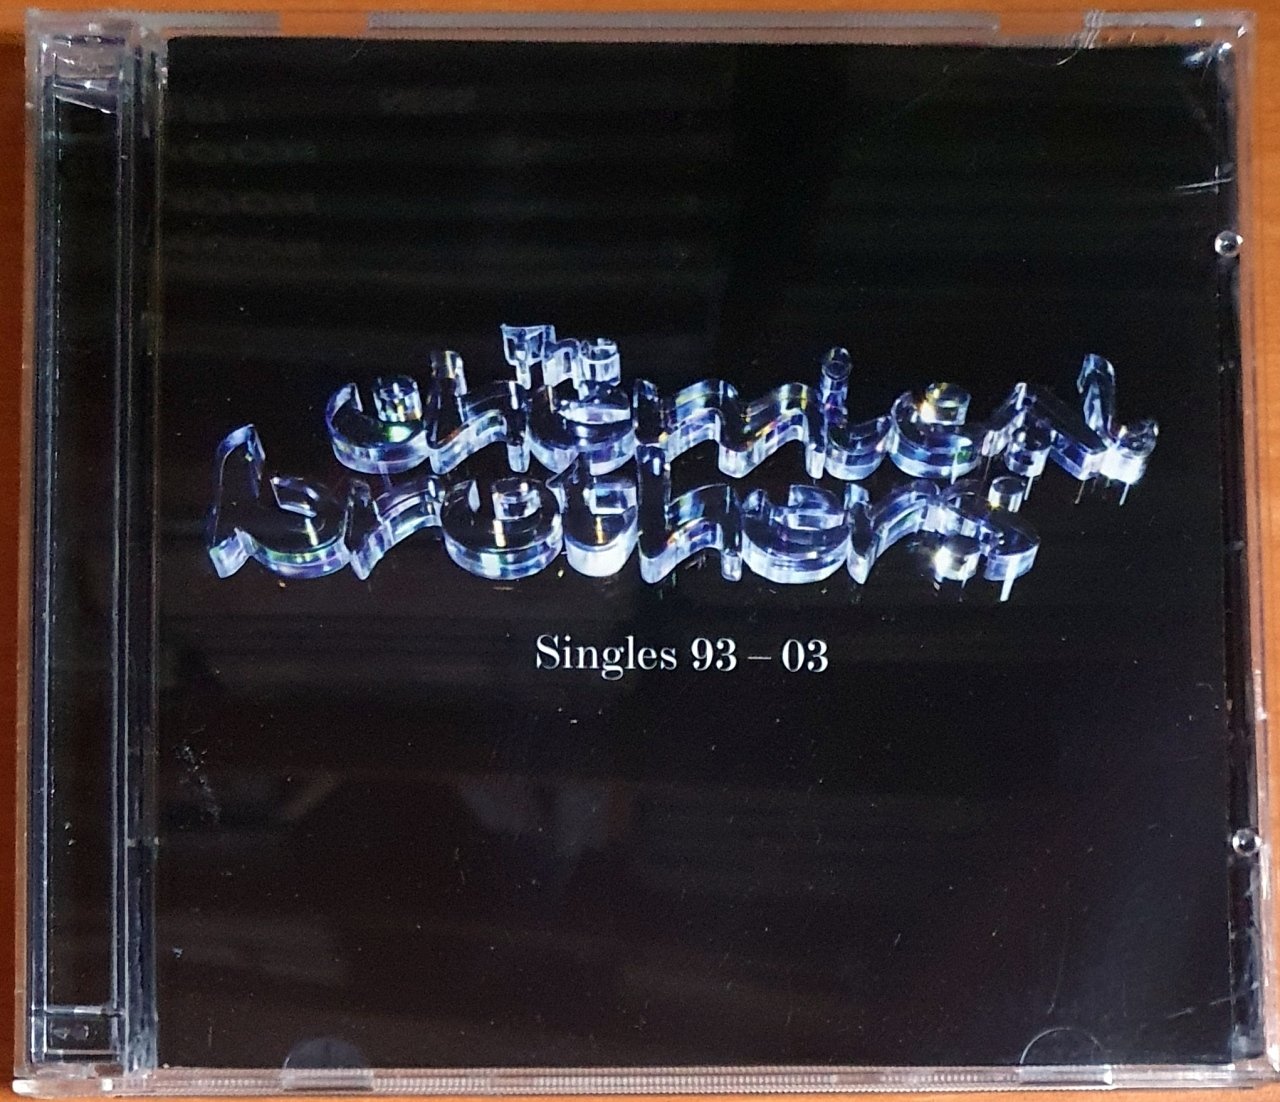 THE CHEMICAL BROTHERS - SINGLES 93-03 (2003) - 2CD 2.EL